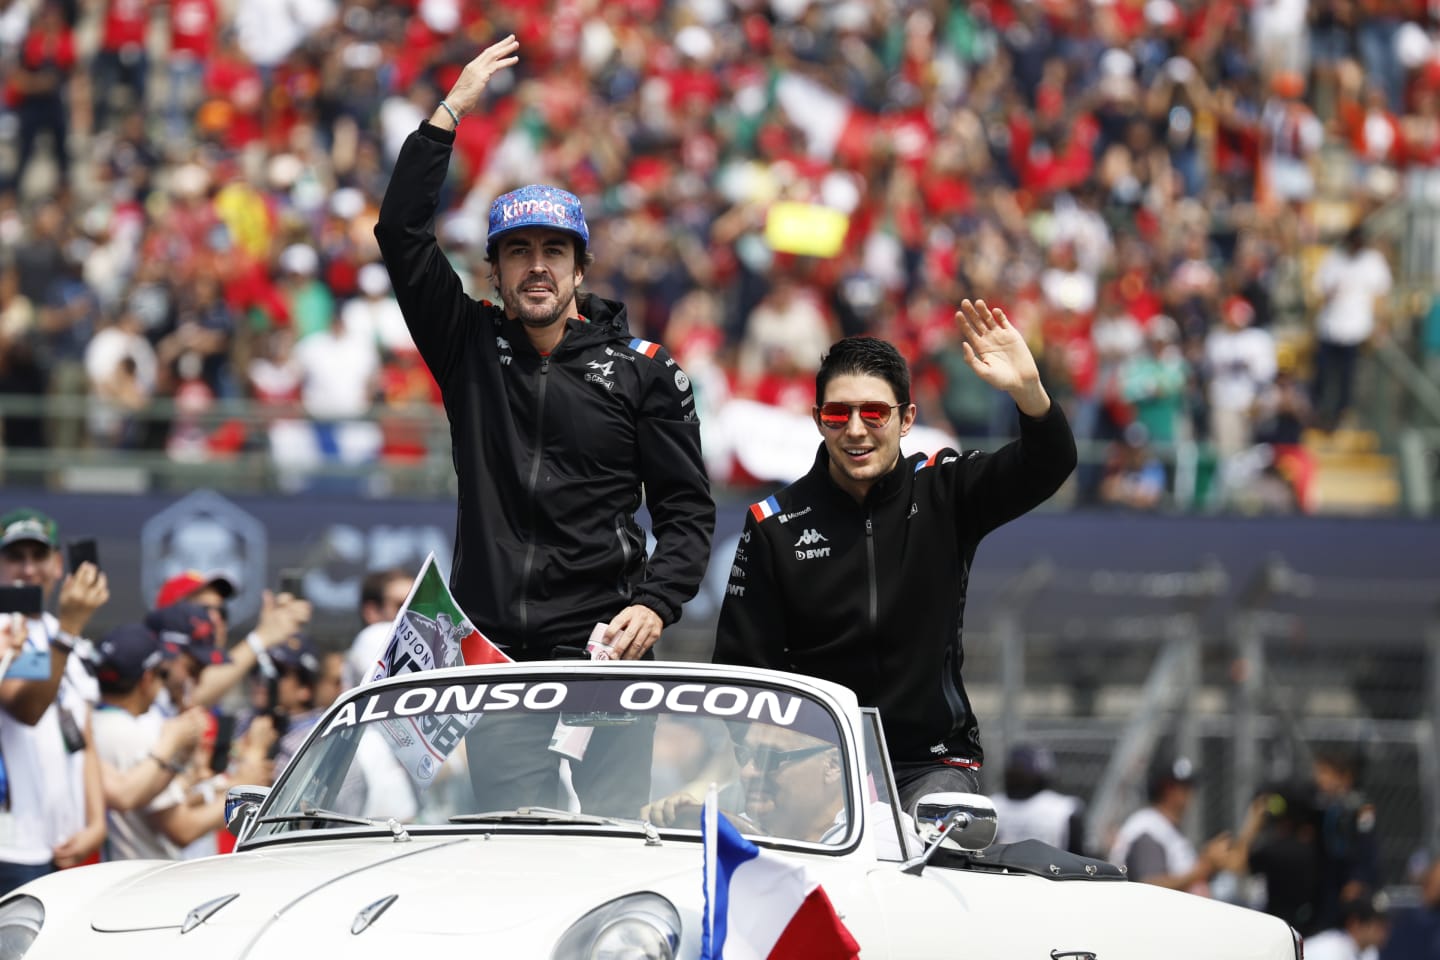 MEXICO CITY, MEXICO - OCTOBER 30: Fernando Alonso of Spain and Alpine F1 and Esteban Ocon of France and Alpine F1 wave to the crowd on the drivers parade prior to the F1 Grand Prix of Mexico at Autodromo Hermanos Rodriguez on October 30, 2022 in Mexico City, Mexico. (Photo by Jared C. Tilton/Getty Images)